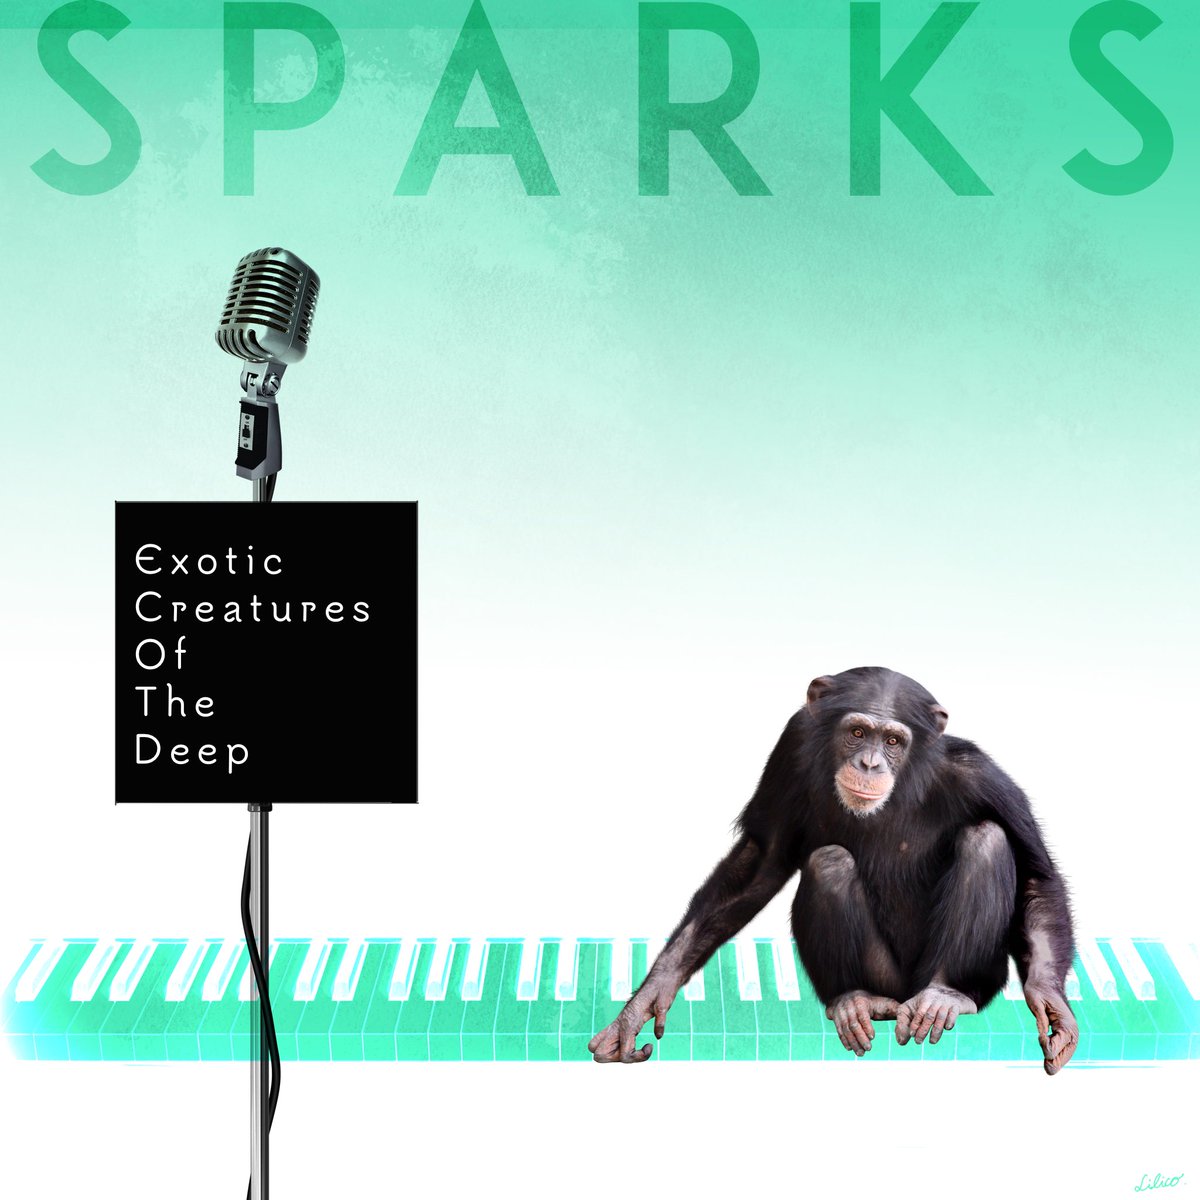 #sparkstember

Day 21:Exotic Creatures of The Deep

#tectecs
#sparks